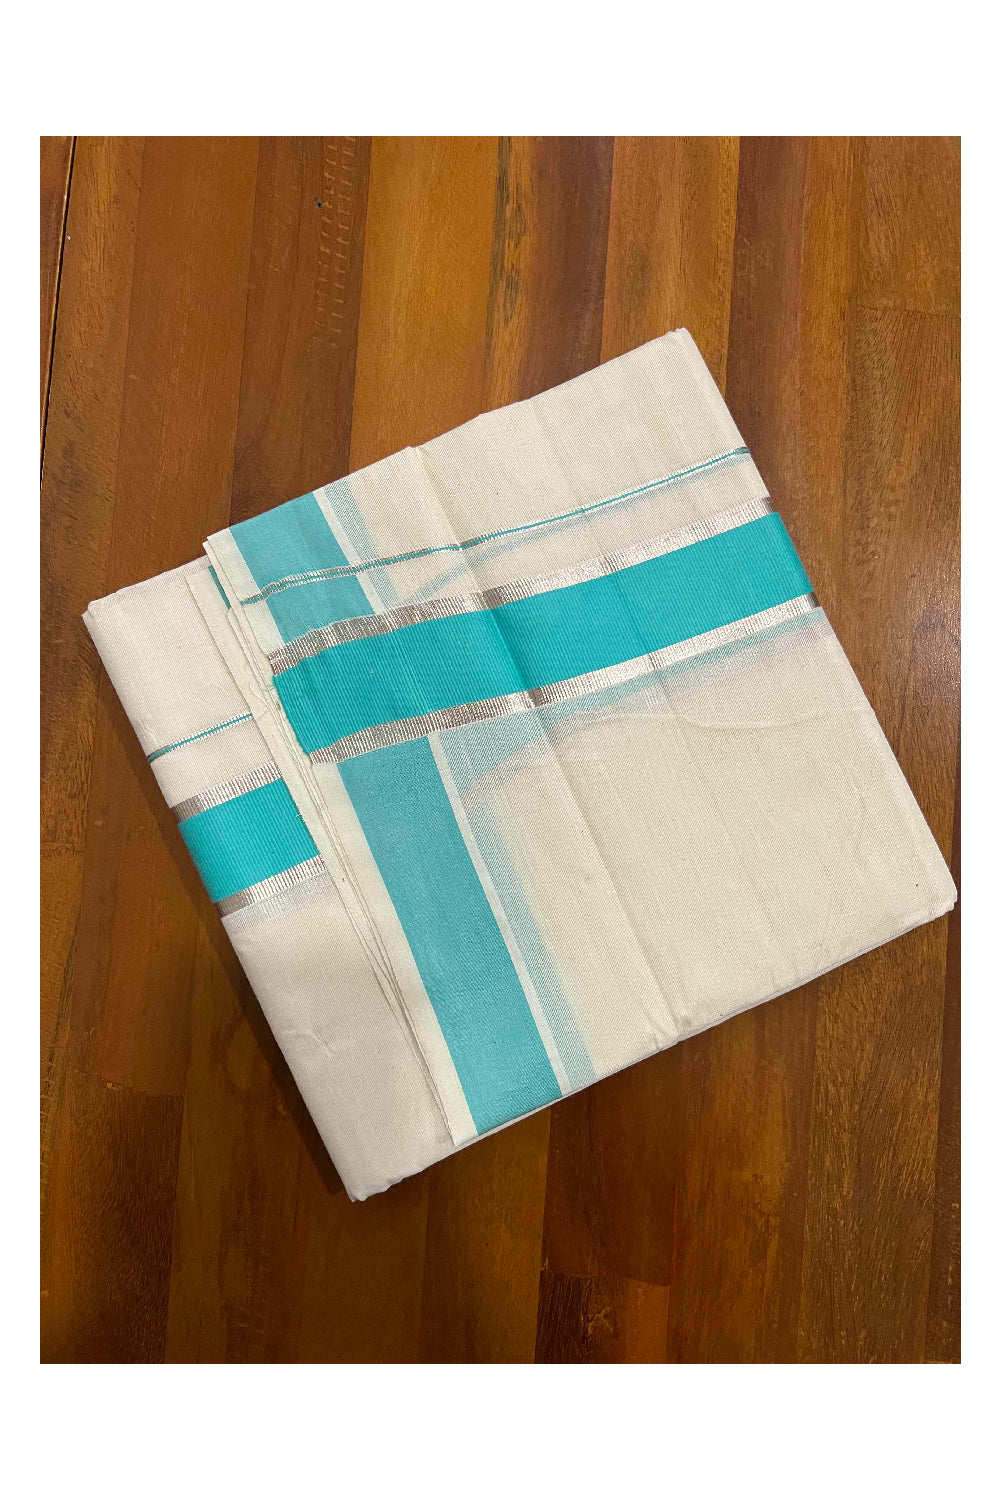 Off White Kerala Double Mundu with Silver Kasavu and Turquoise Border (South Indian Dhoti)